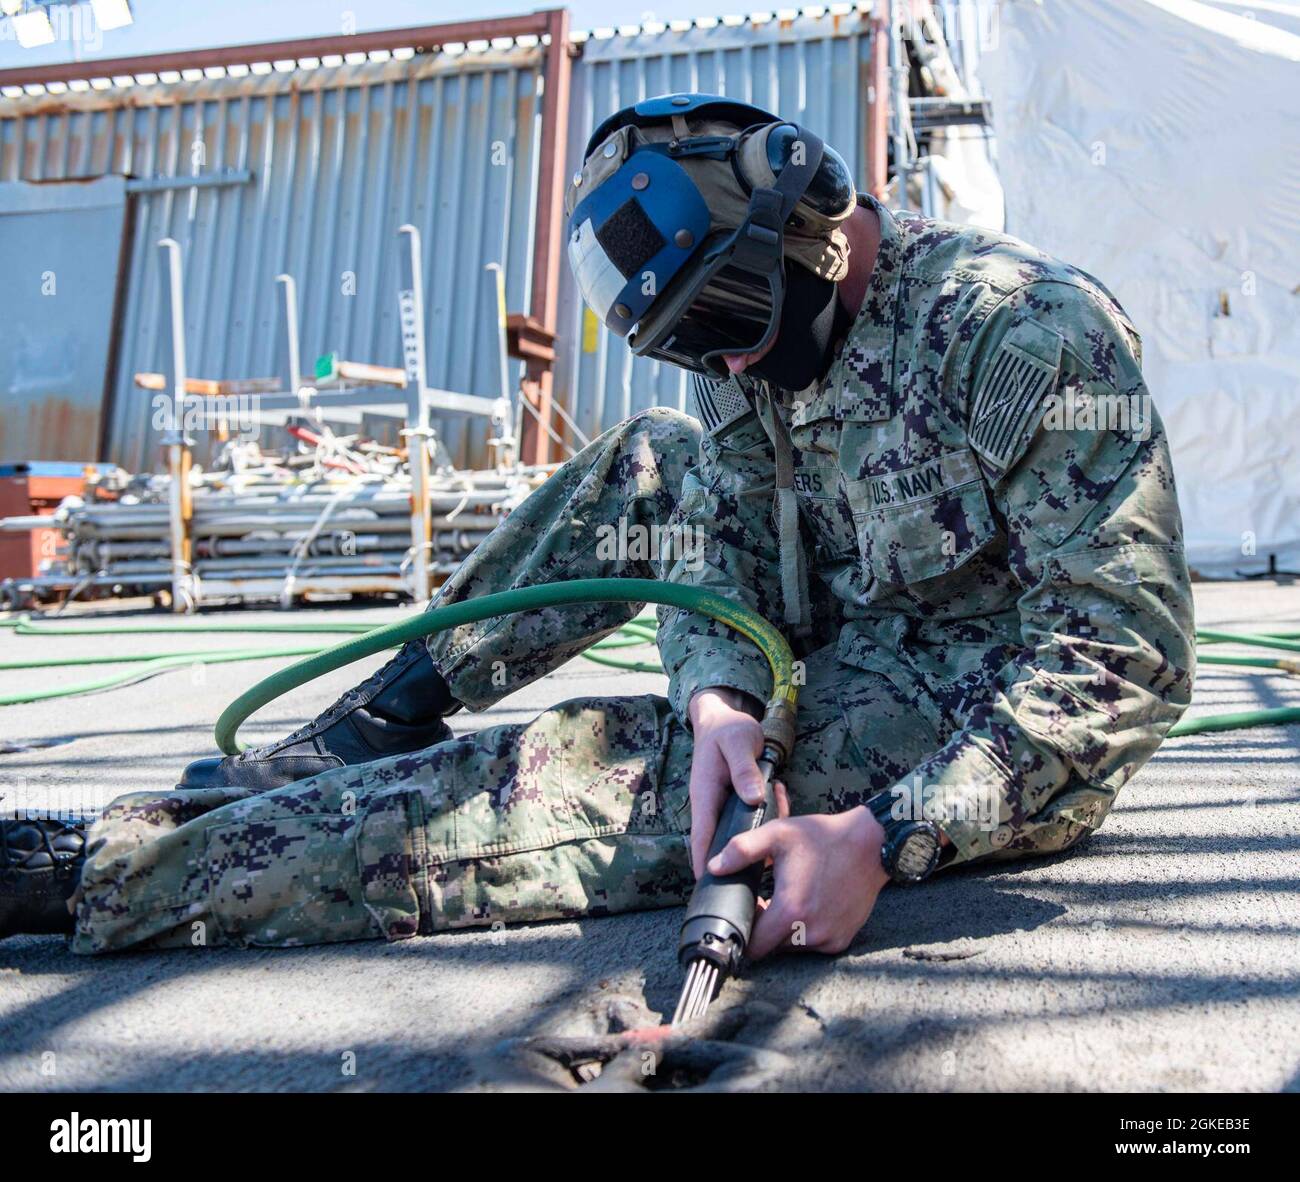 210329-N-SY758-1008 PORTSMOUTH, Va. (March 29, 2021) Aviation Maintenance Administrationman Airman Jacob Salters, from Kimberly, Alabama, uses a needle gun to clean a padeye on the flight deck aboard the aircraft carrier USS George H. W. Bush (CVN 77). GHWB is currently in Norfolk Naval Shipyard for its Docking Planned Incremental Availability. Stock Photo